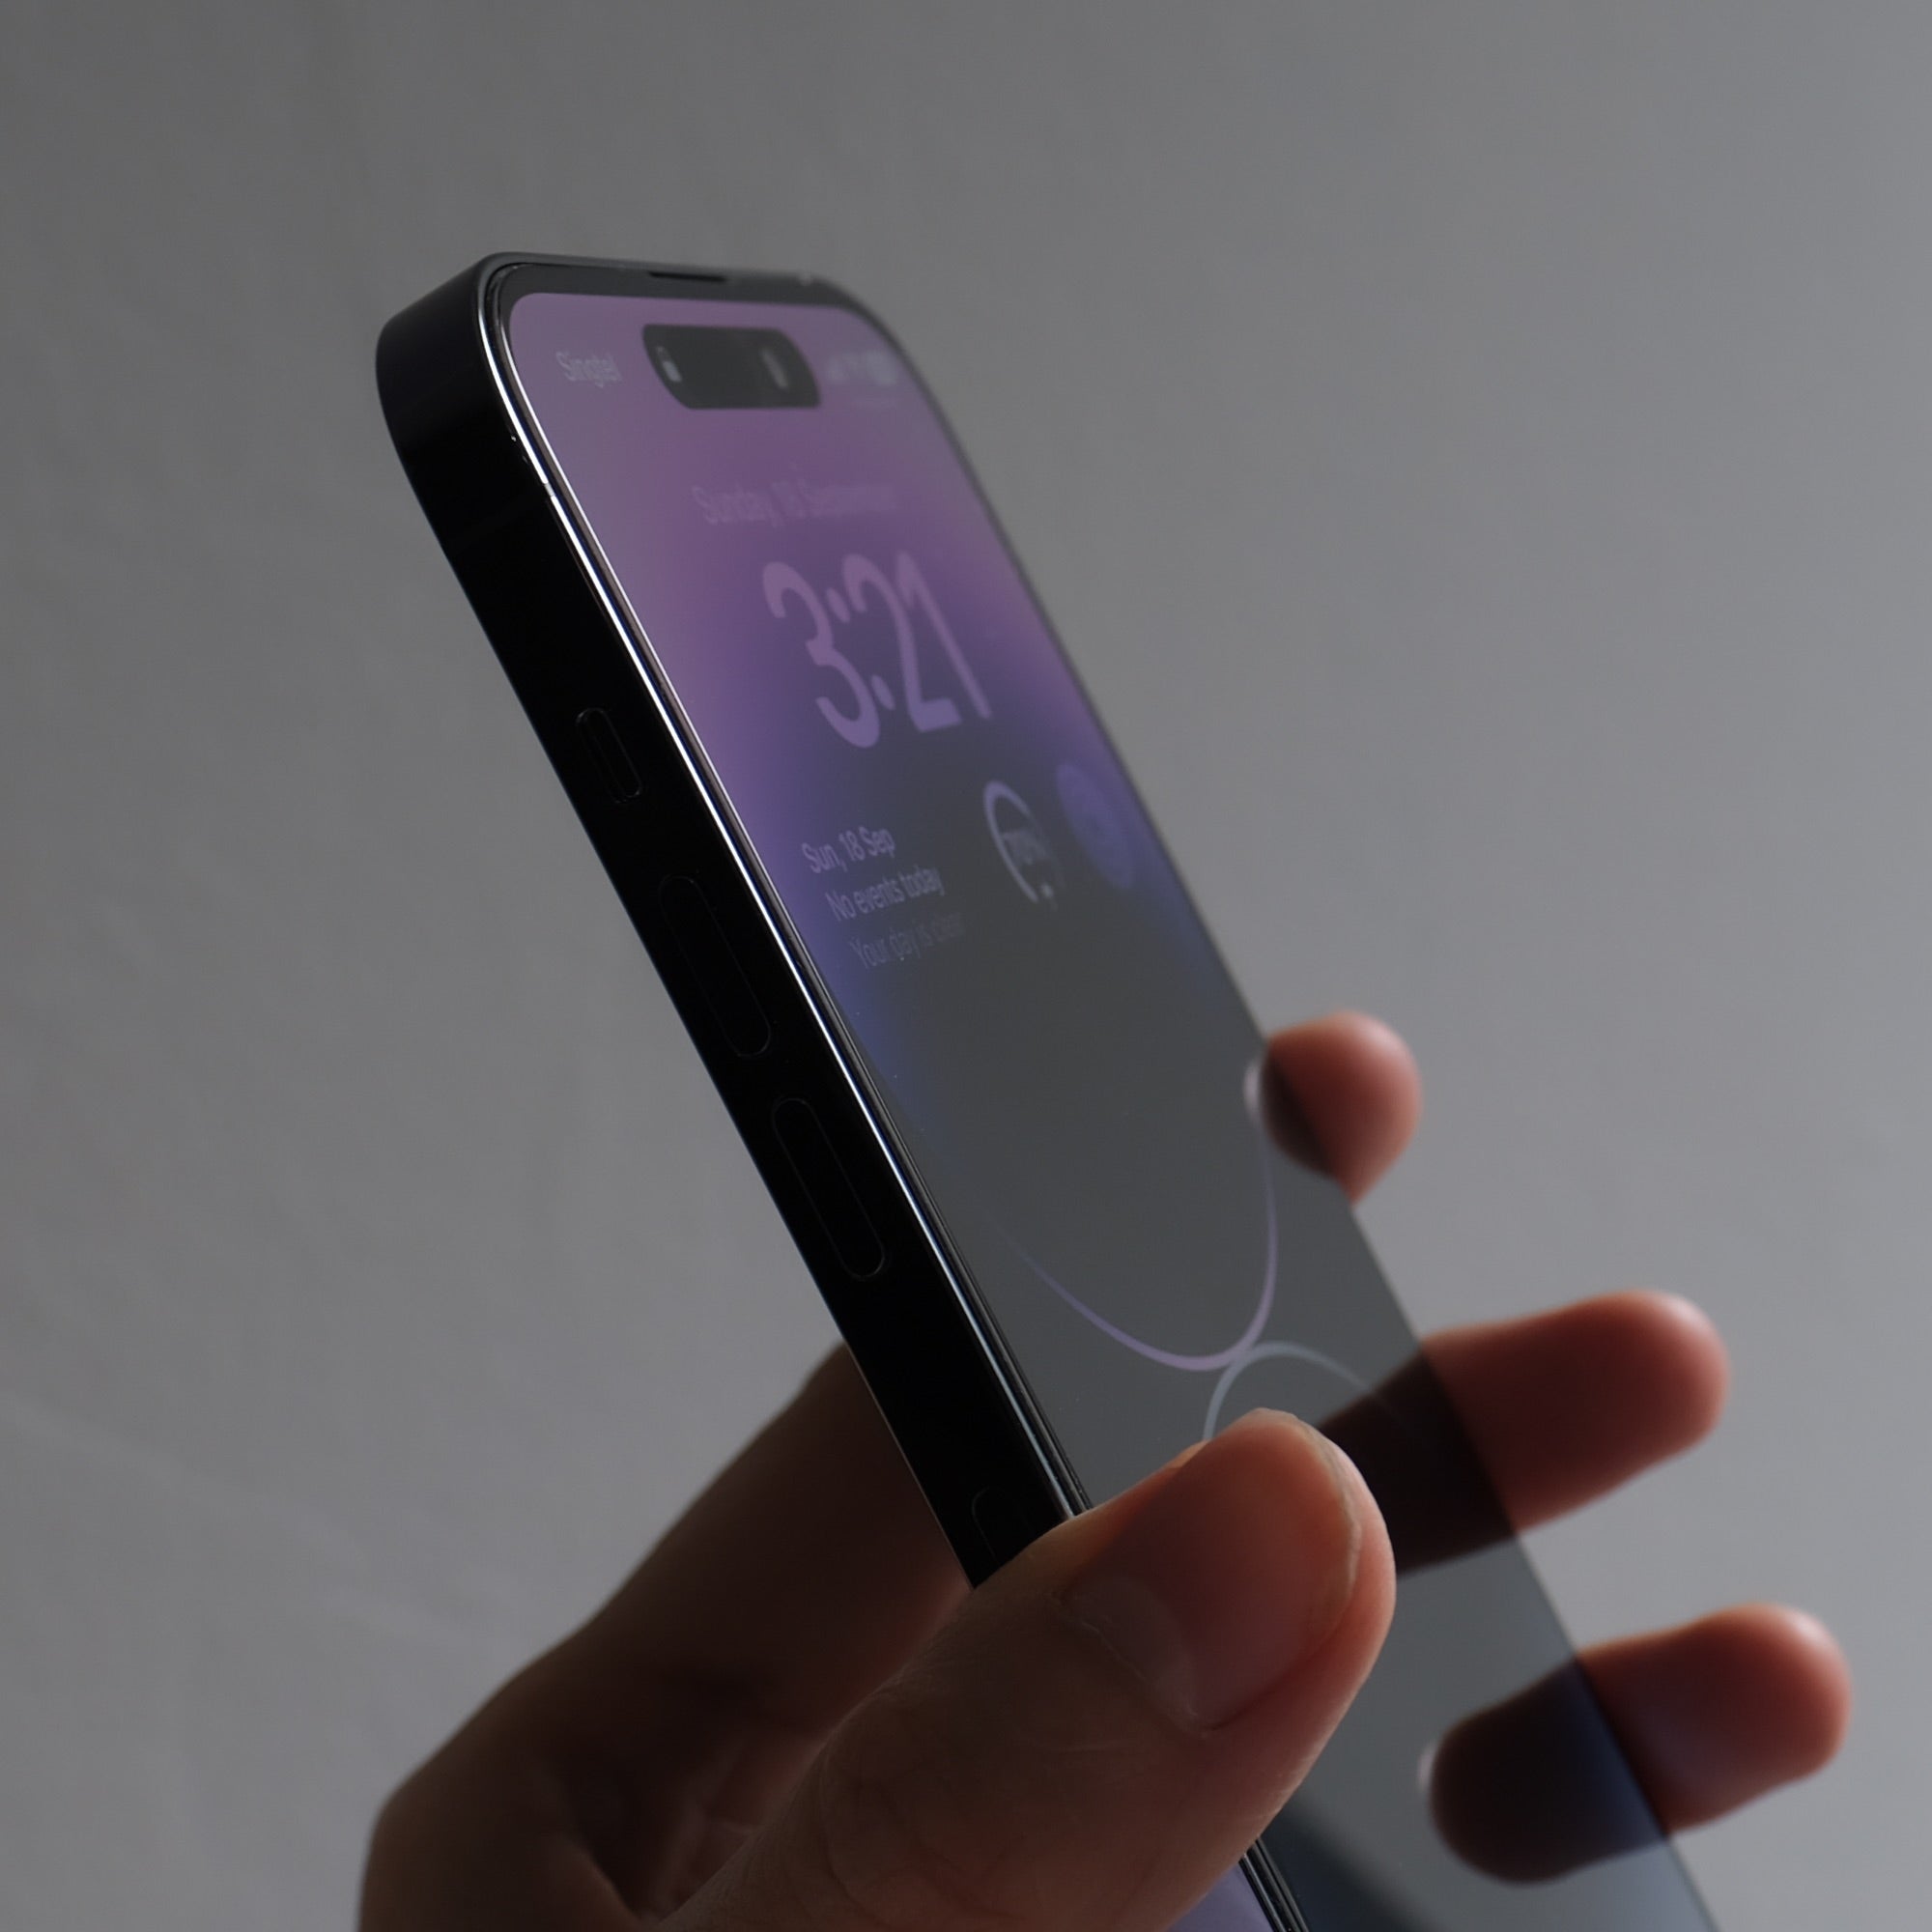 Bare Pane - Best Tempered Glass Screen Protector for iPhone 14 Pro